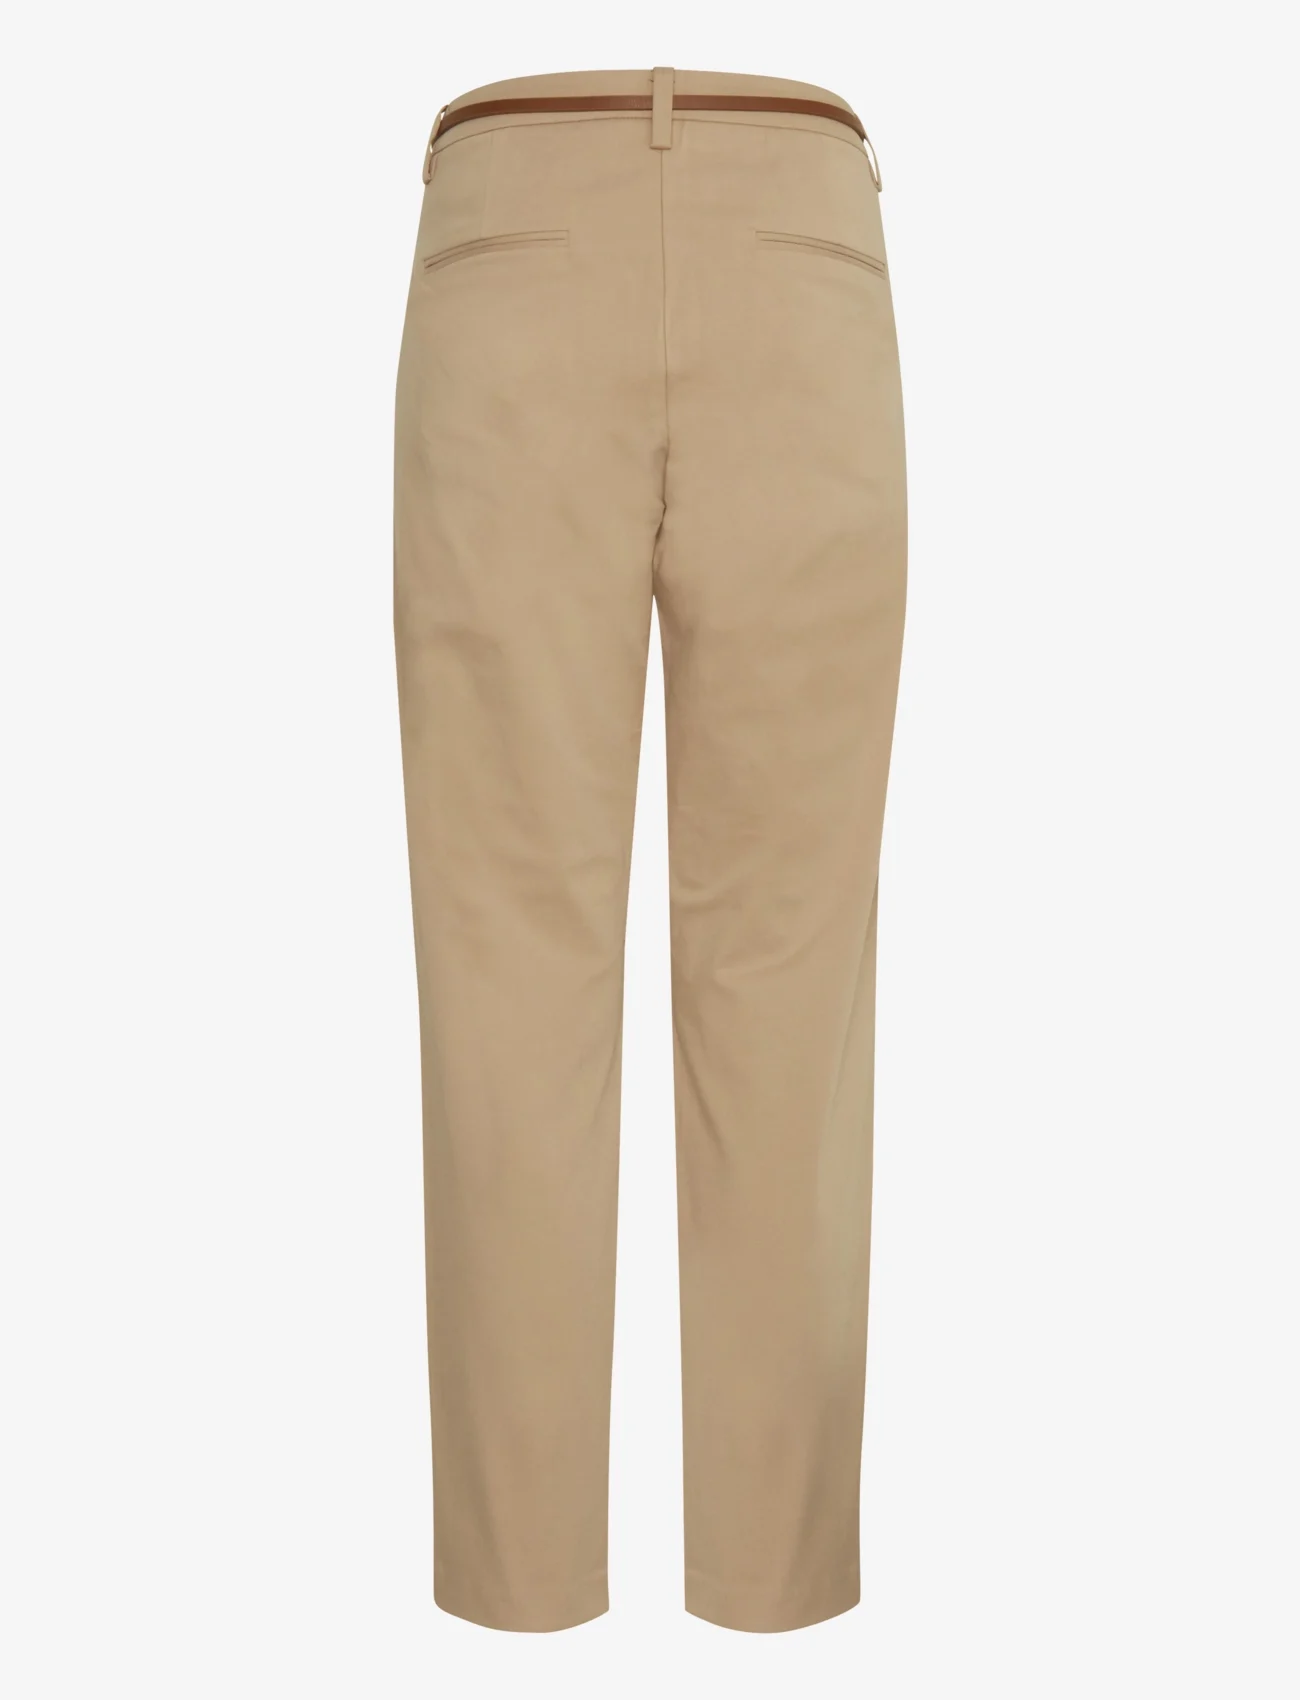 b.young - BYDAYS CIGARET PANTS 2 - - juhlamuotia outlet-hintaan - nomad - 1